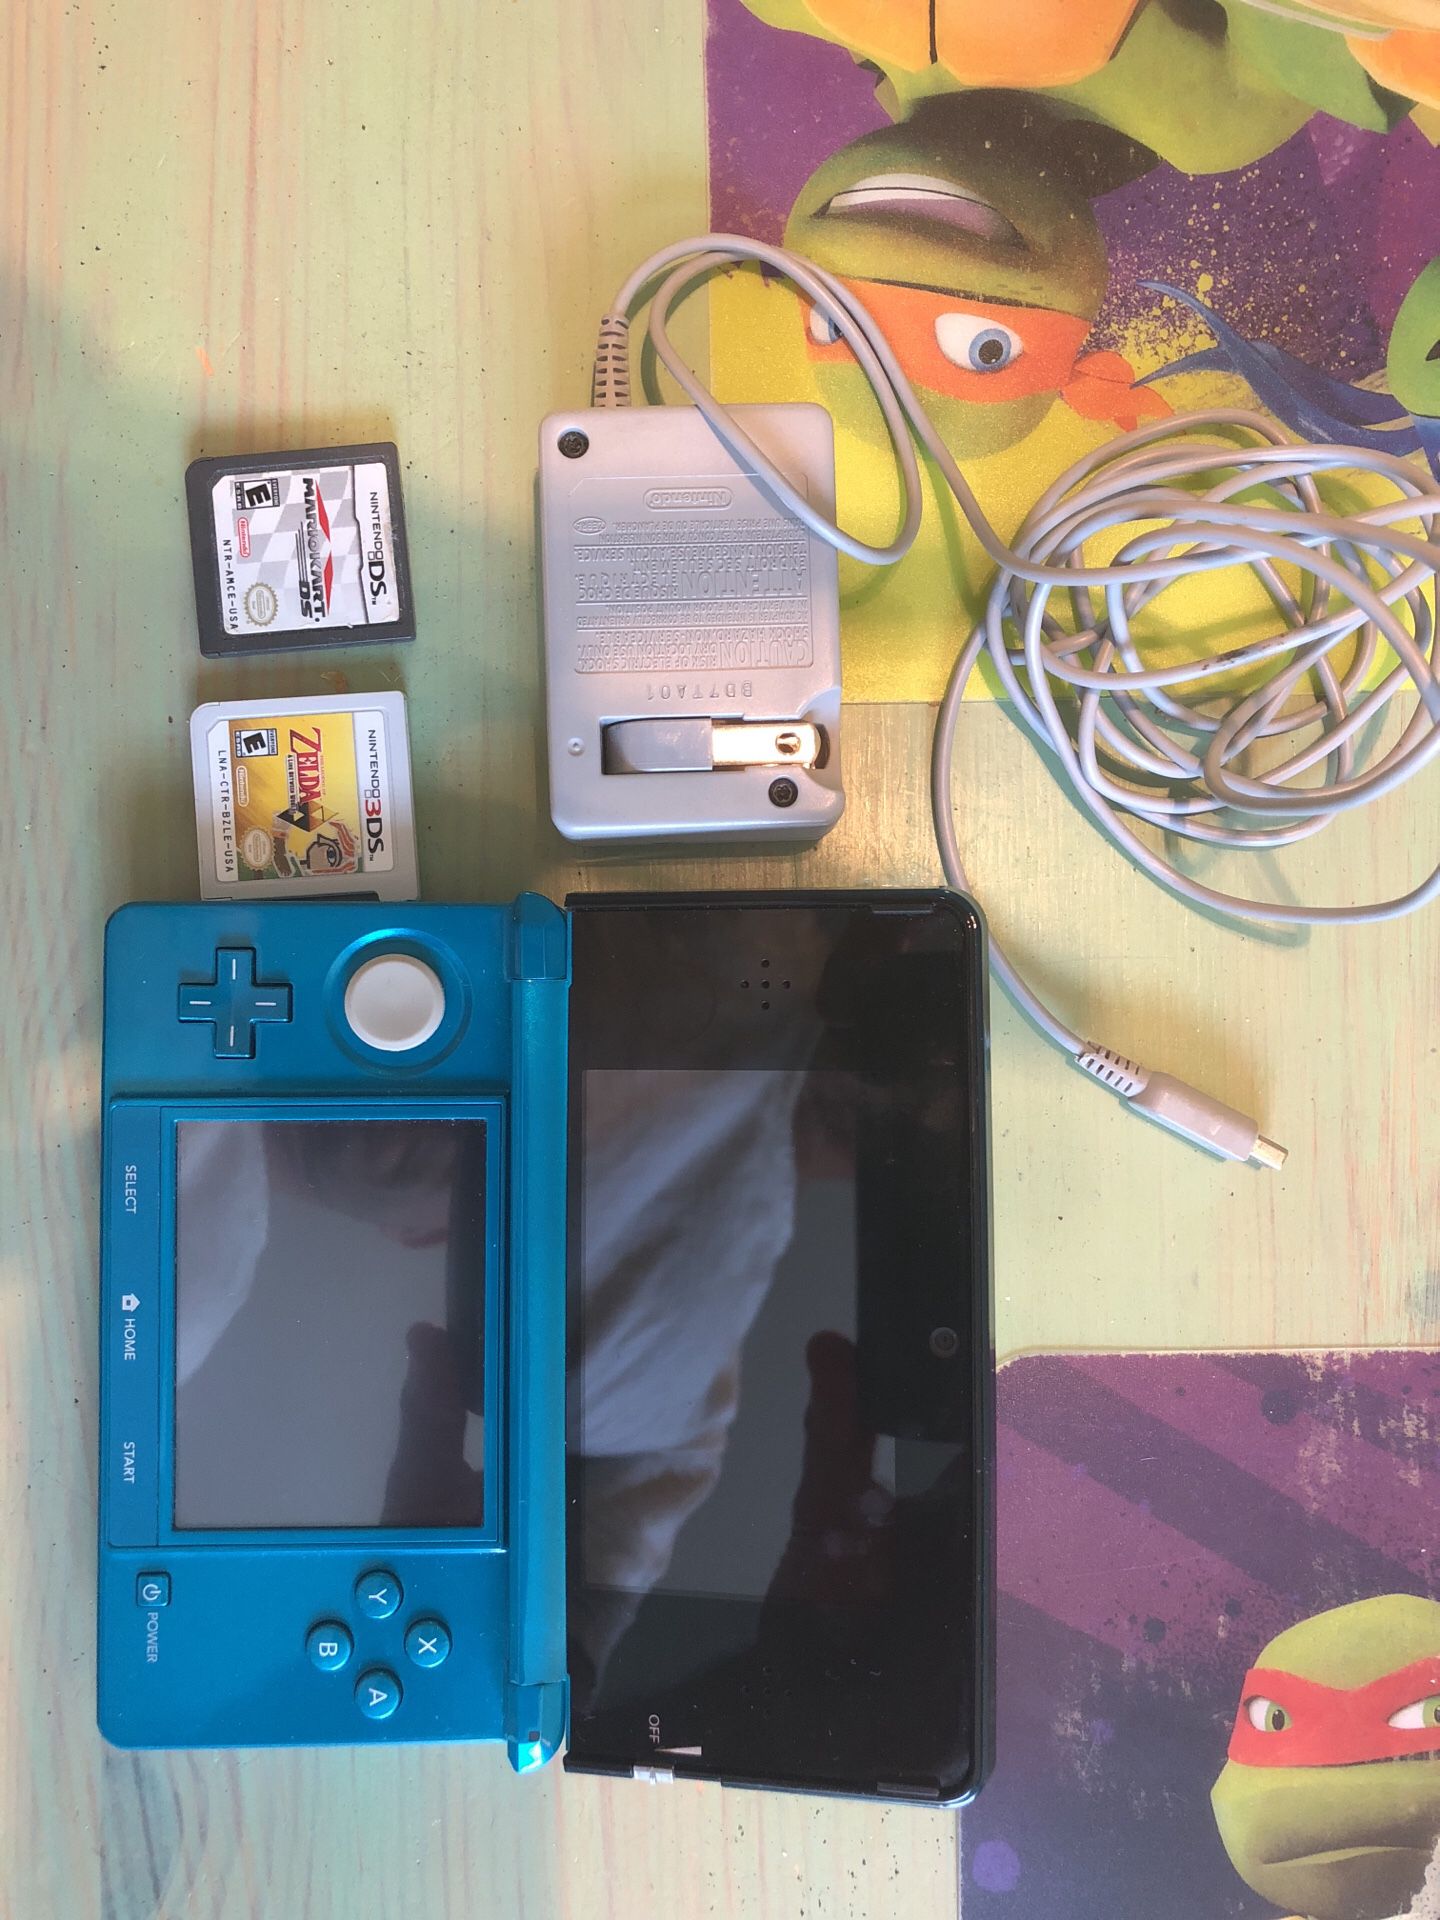 Nintendo 3DS plus charger and 2 games.